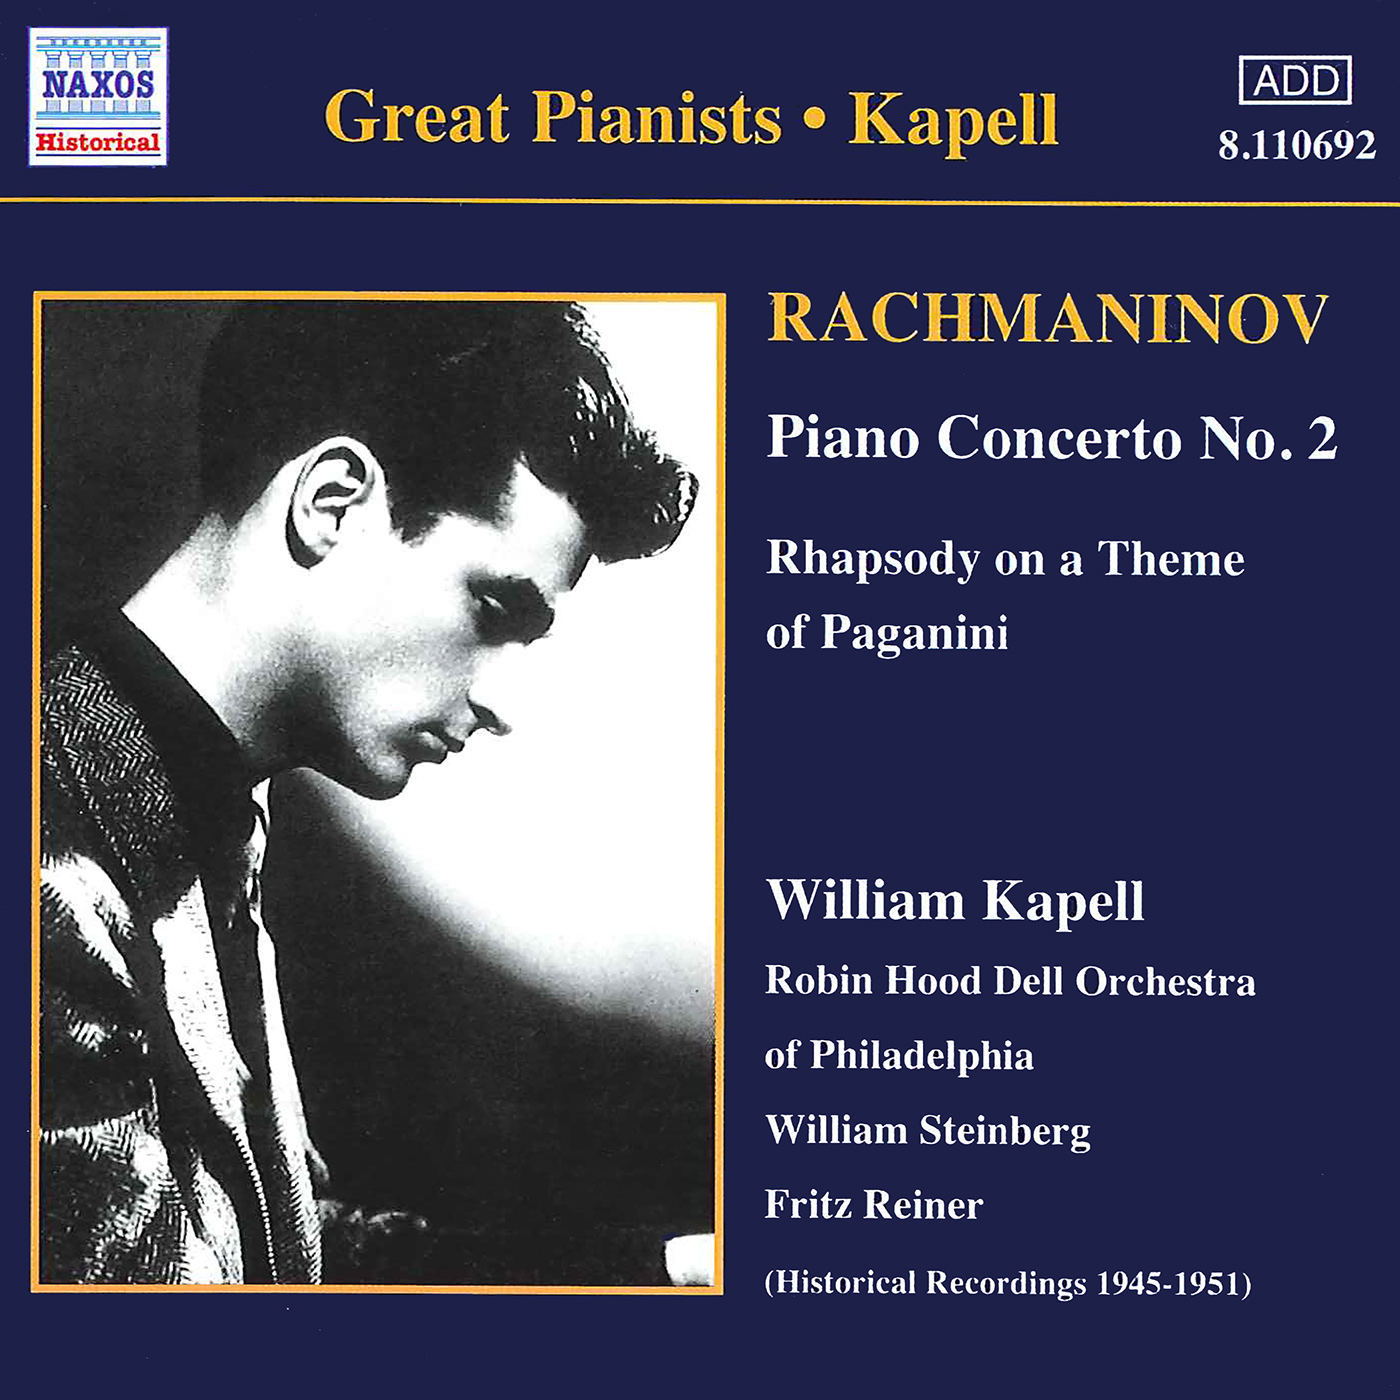 Rhapsody on a Theme of Paganini, Op. 43:Variation XIV: L'istesso tempo